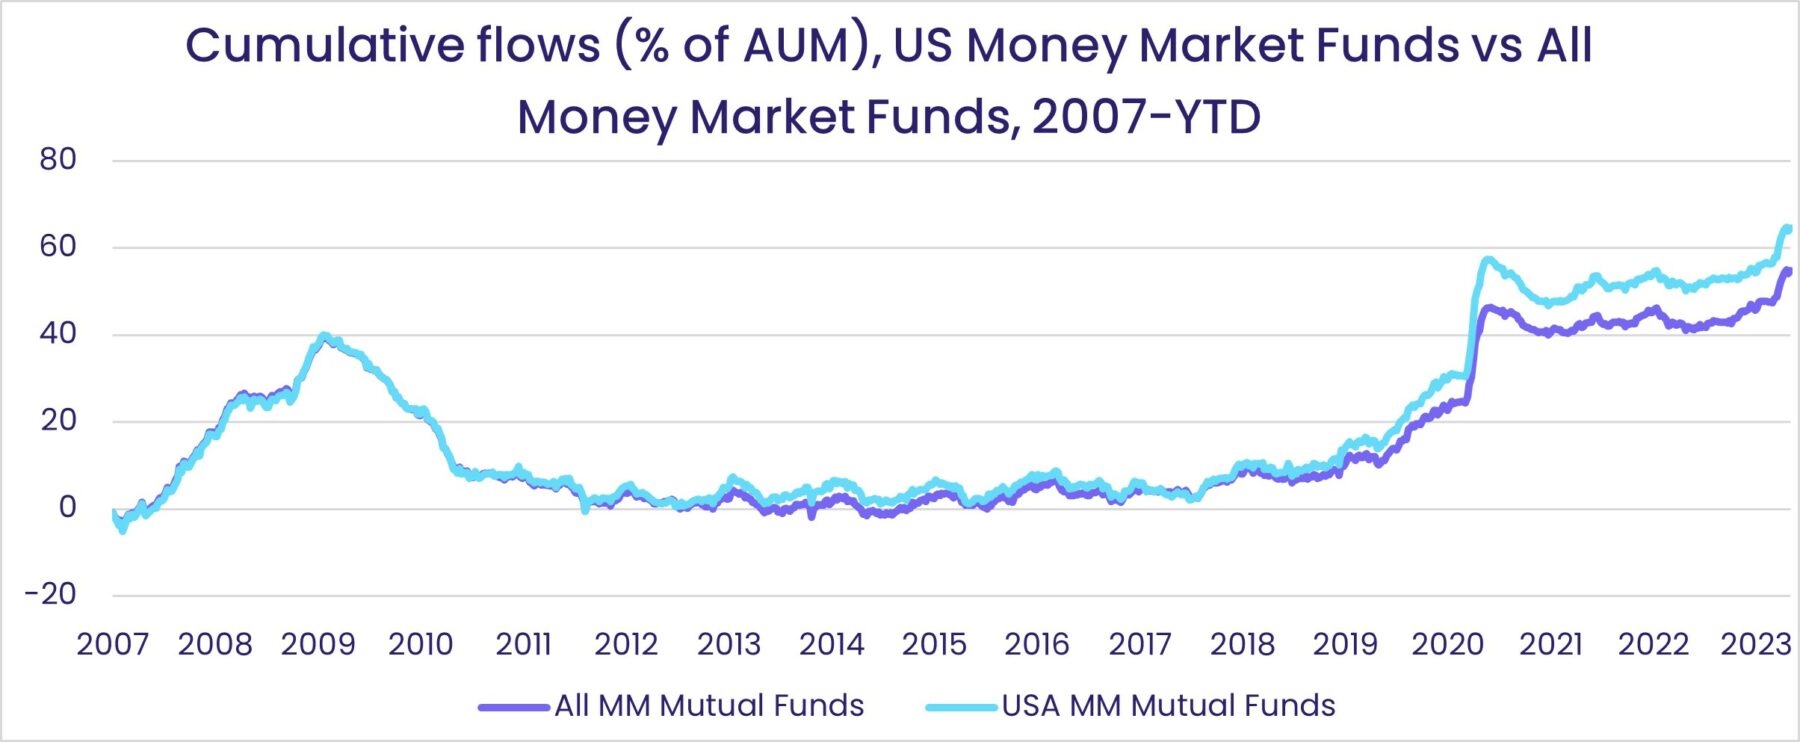 Image of a chart representing "Cumulative flows (% of AUM), US Money Market Funds vs All Money Market Funds, 2007-YTD"